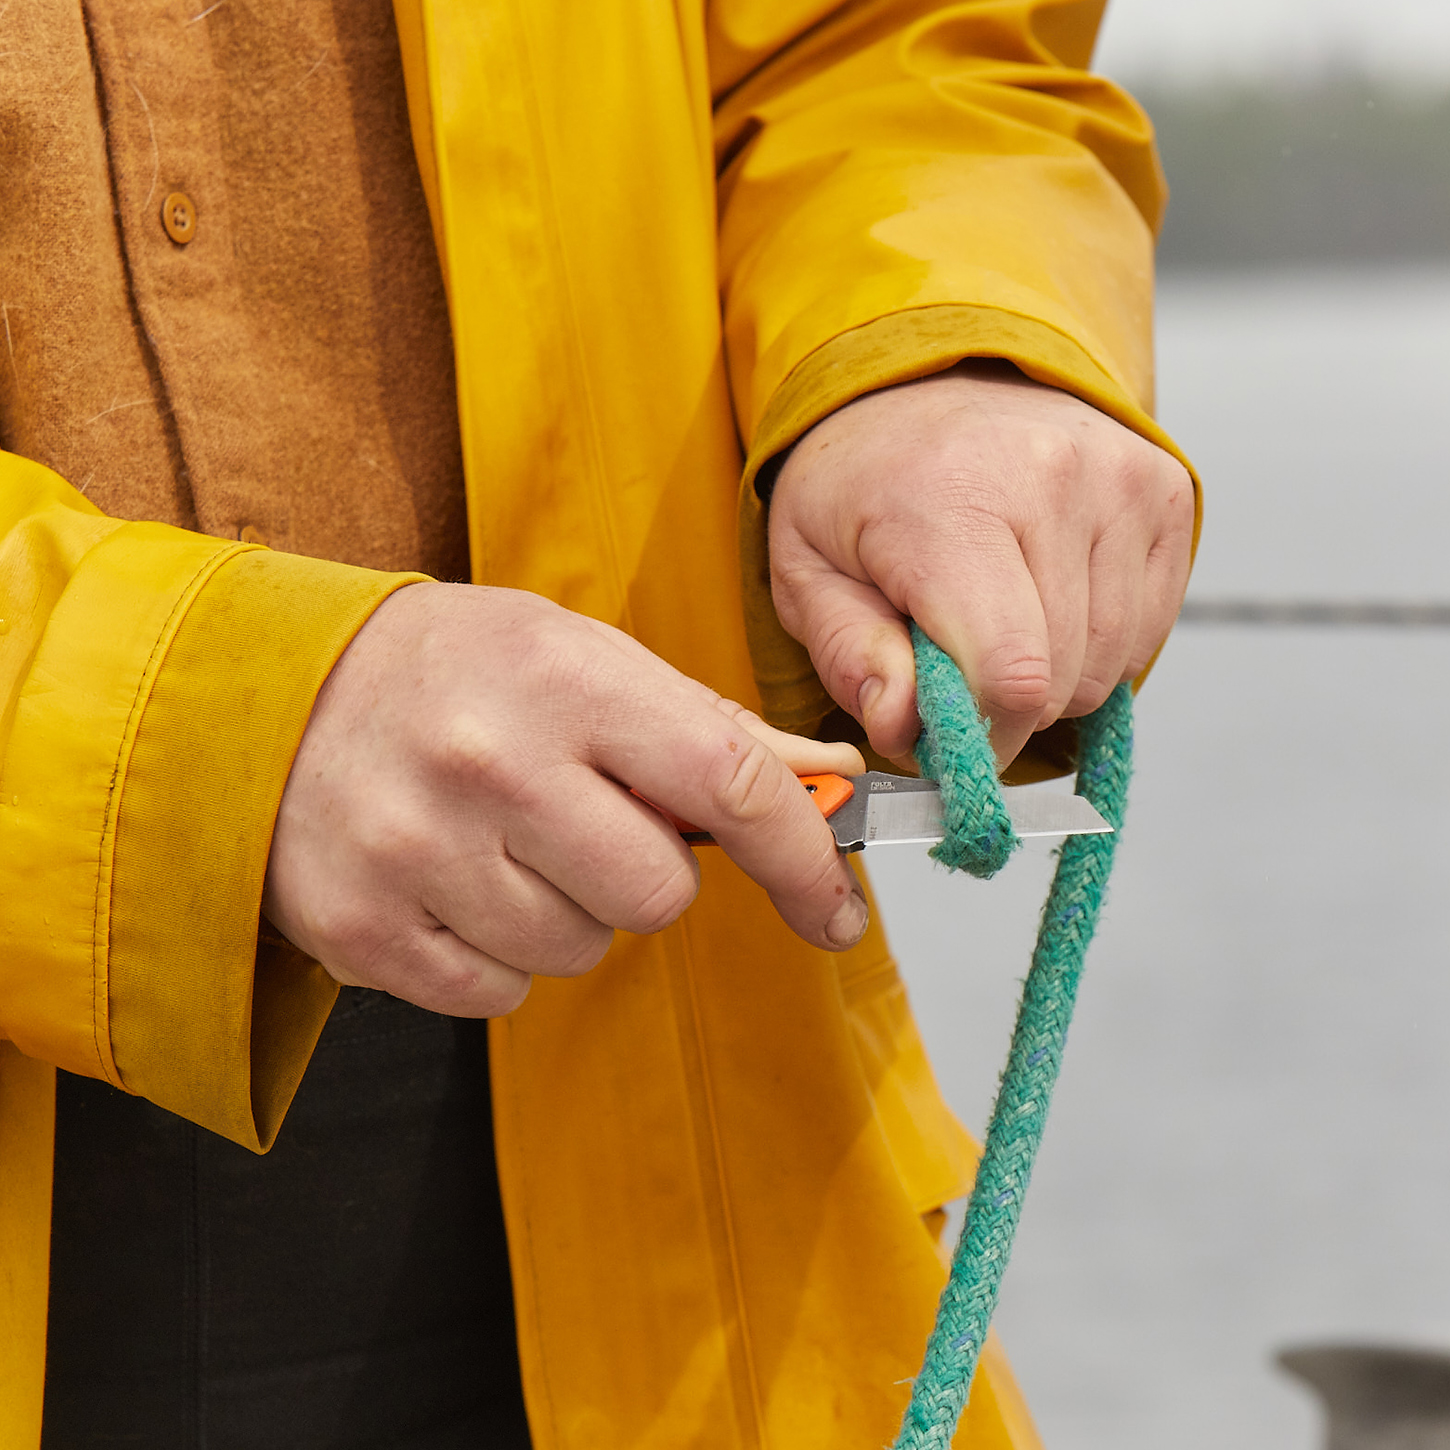 Woman in yellow jacket cutting rope with knife.